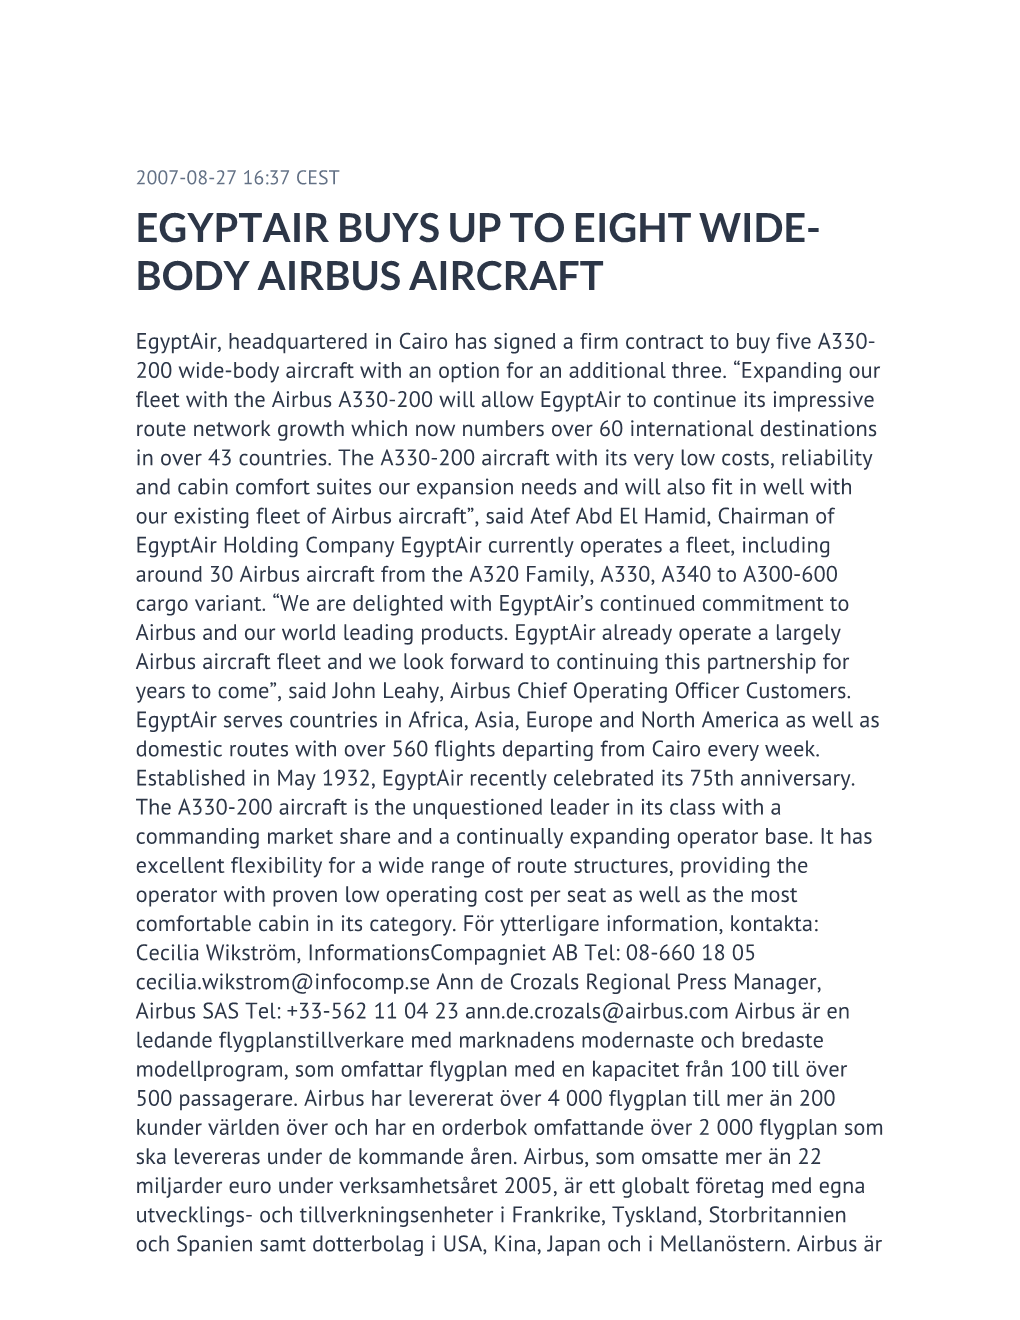 Egyptair Buys up to Eight Wide-Body Airbus Aircraft